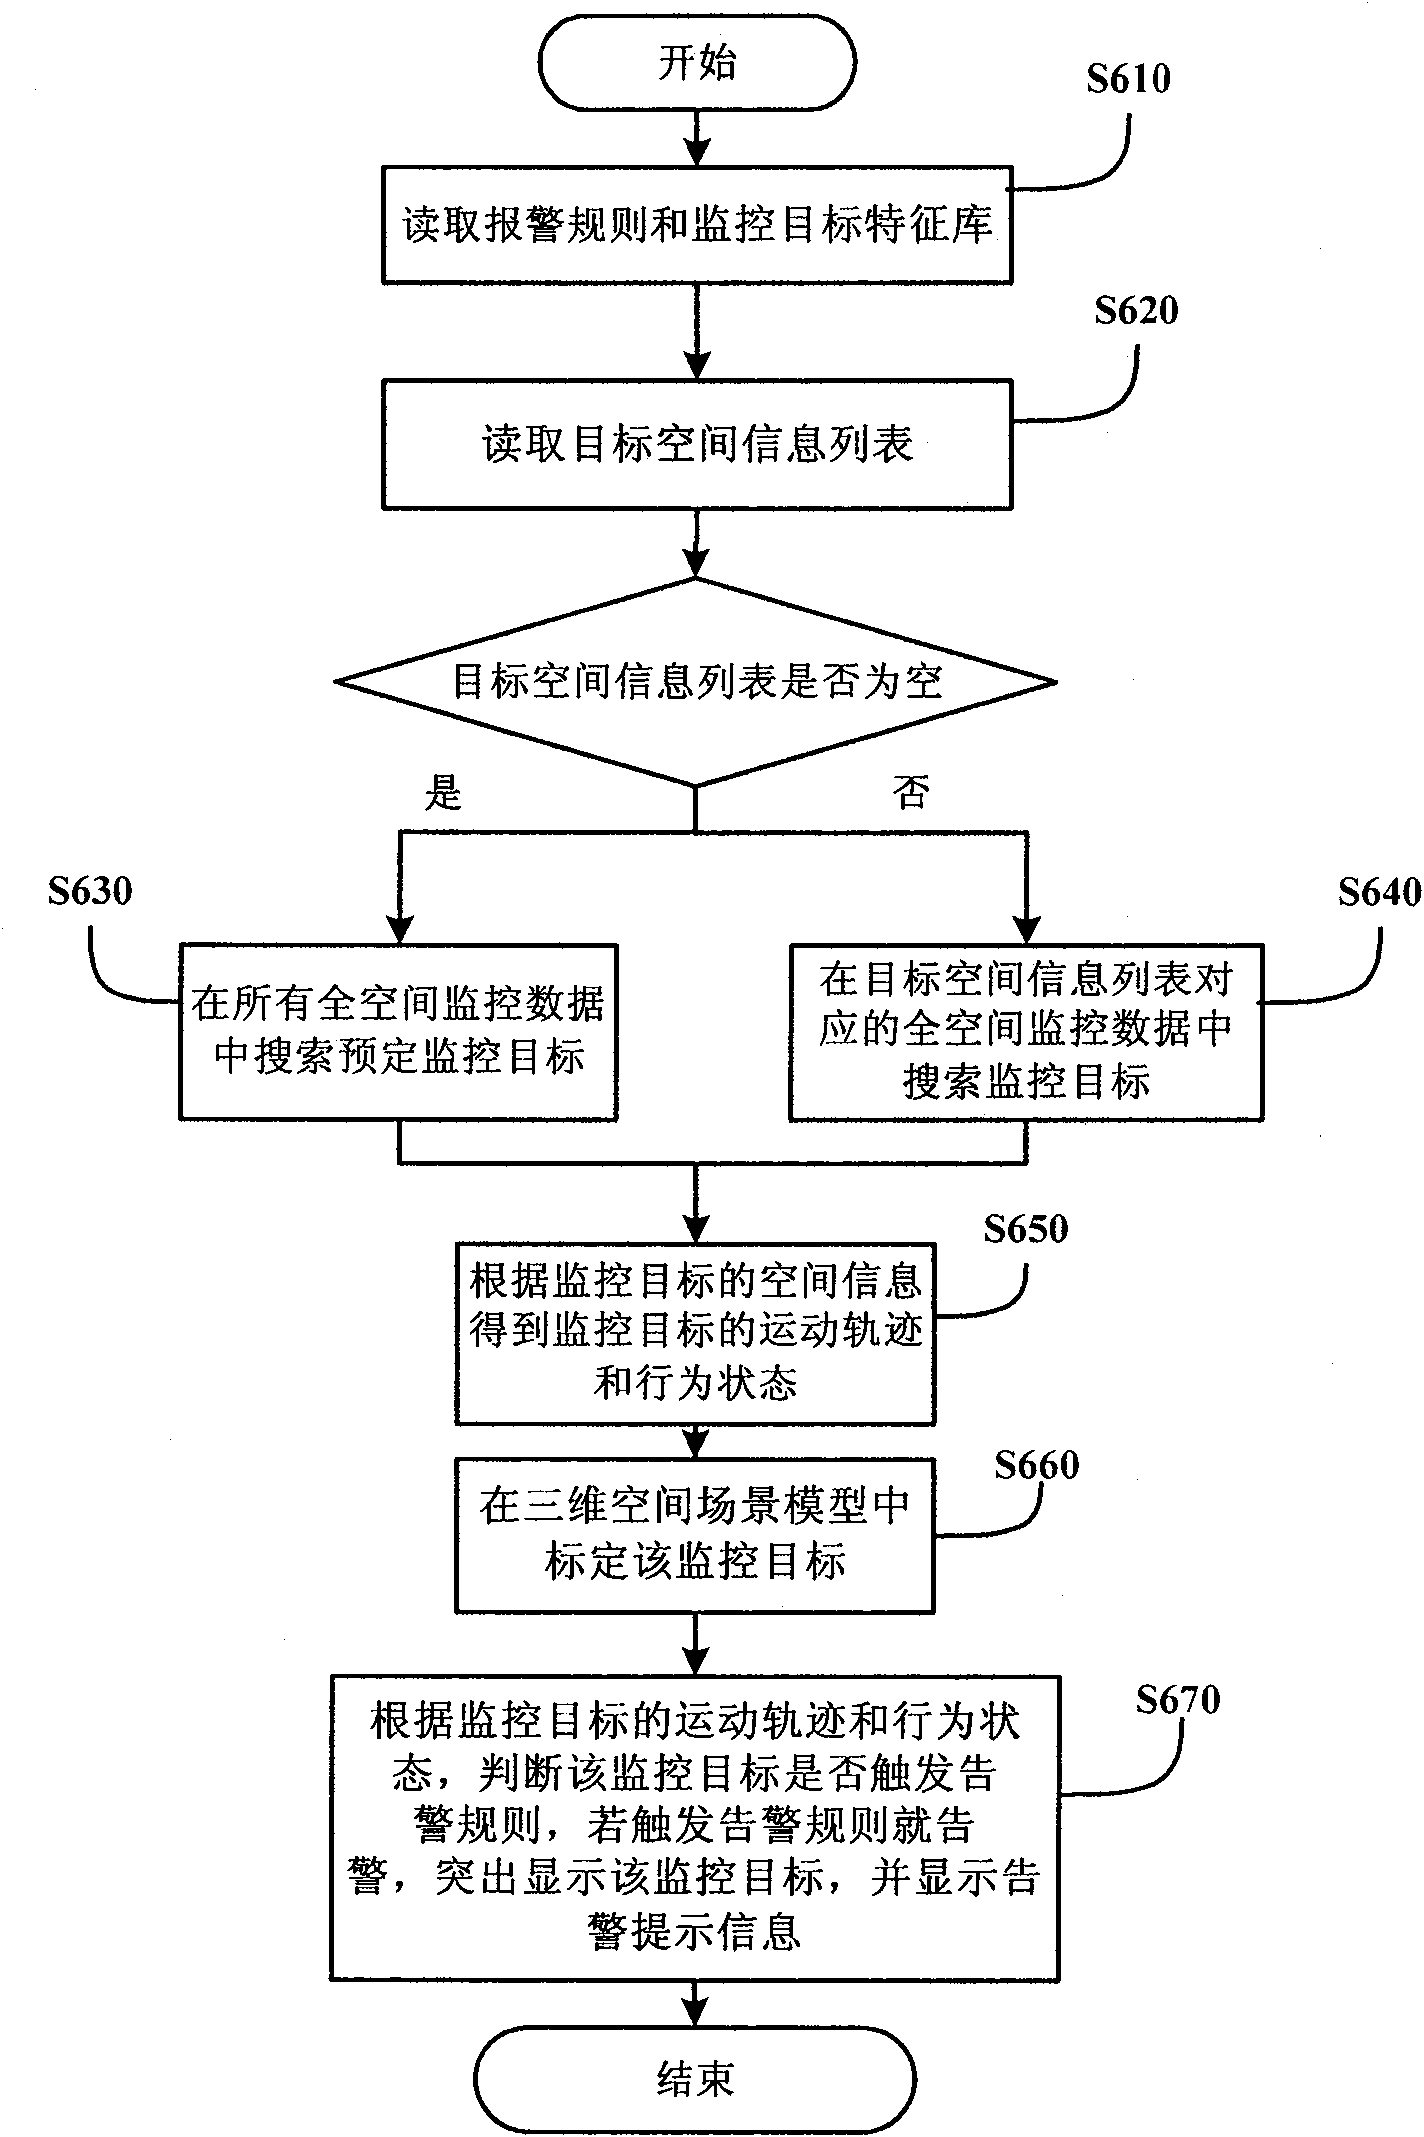 Digital full-space intelligent monitoring system and method